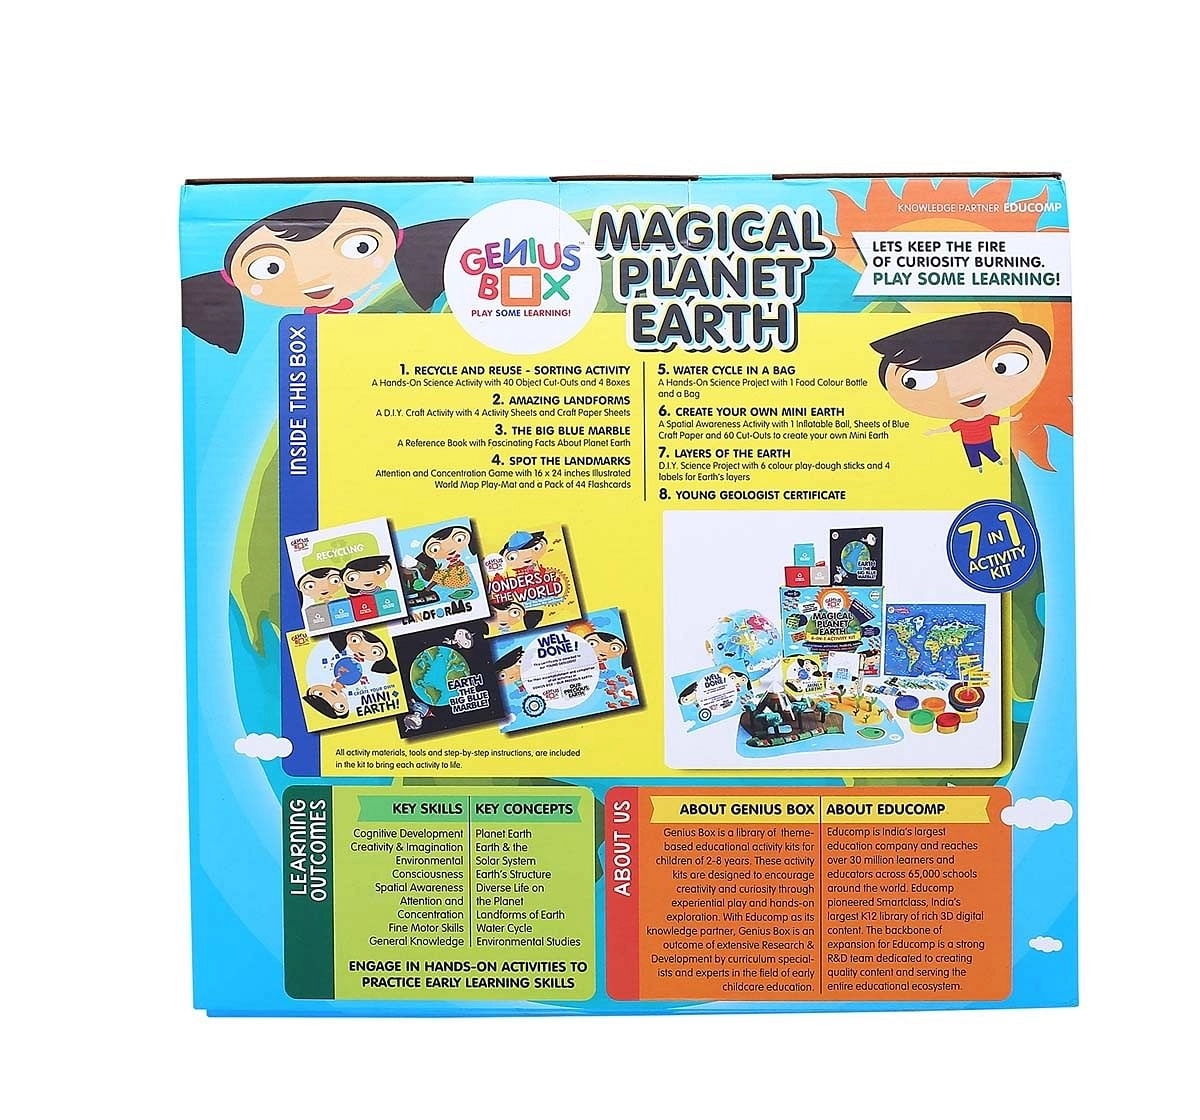 Box　Toys　Science　age　Learning　Kids　for　Educational　Kits　Magical　Shop　Earth　(Multicolour)　Planet　Genius　India　3Y+　Hamleys